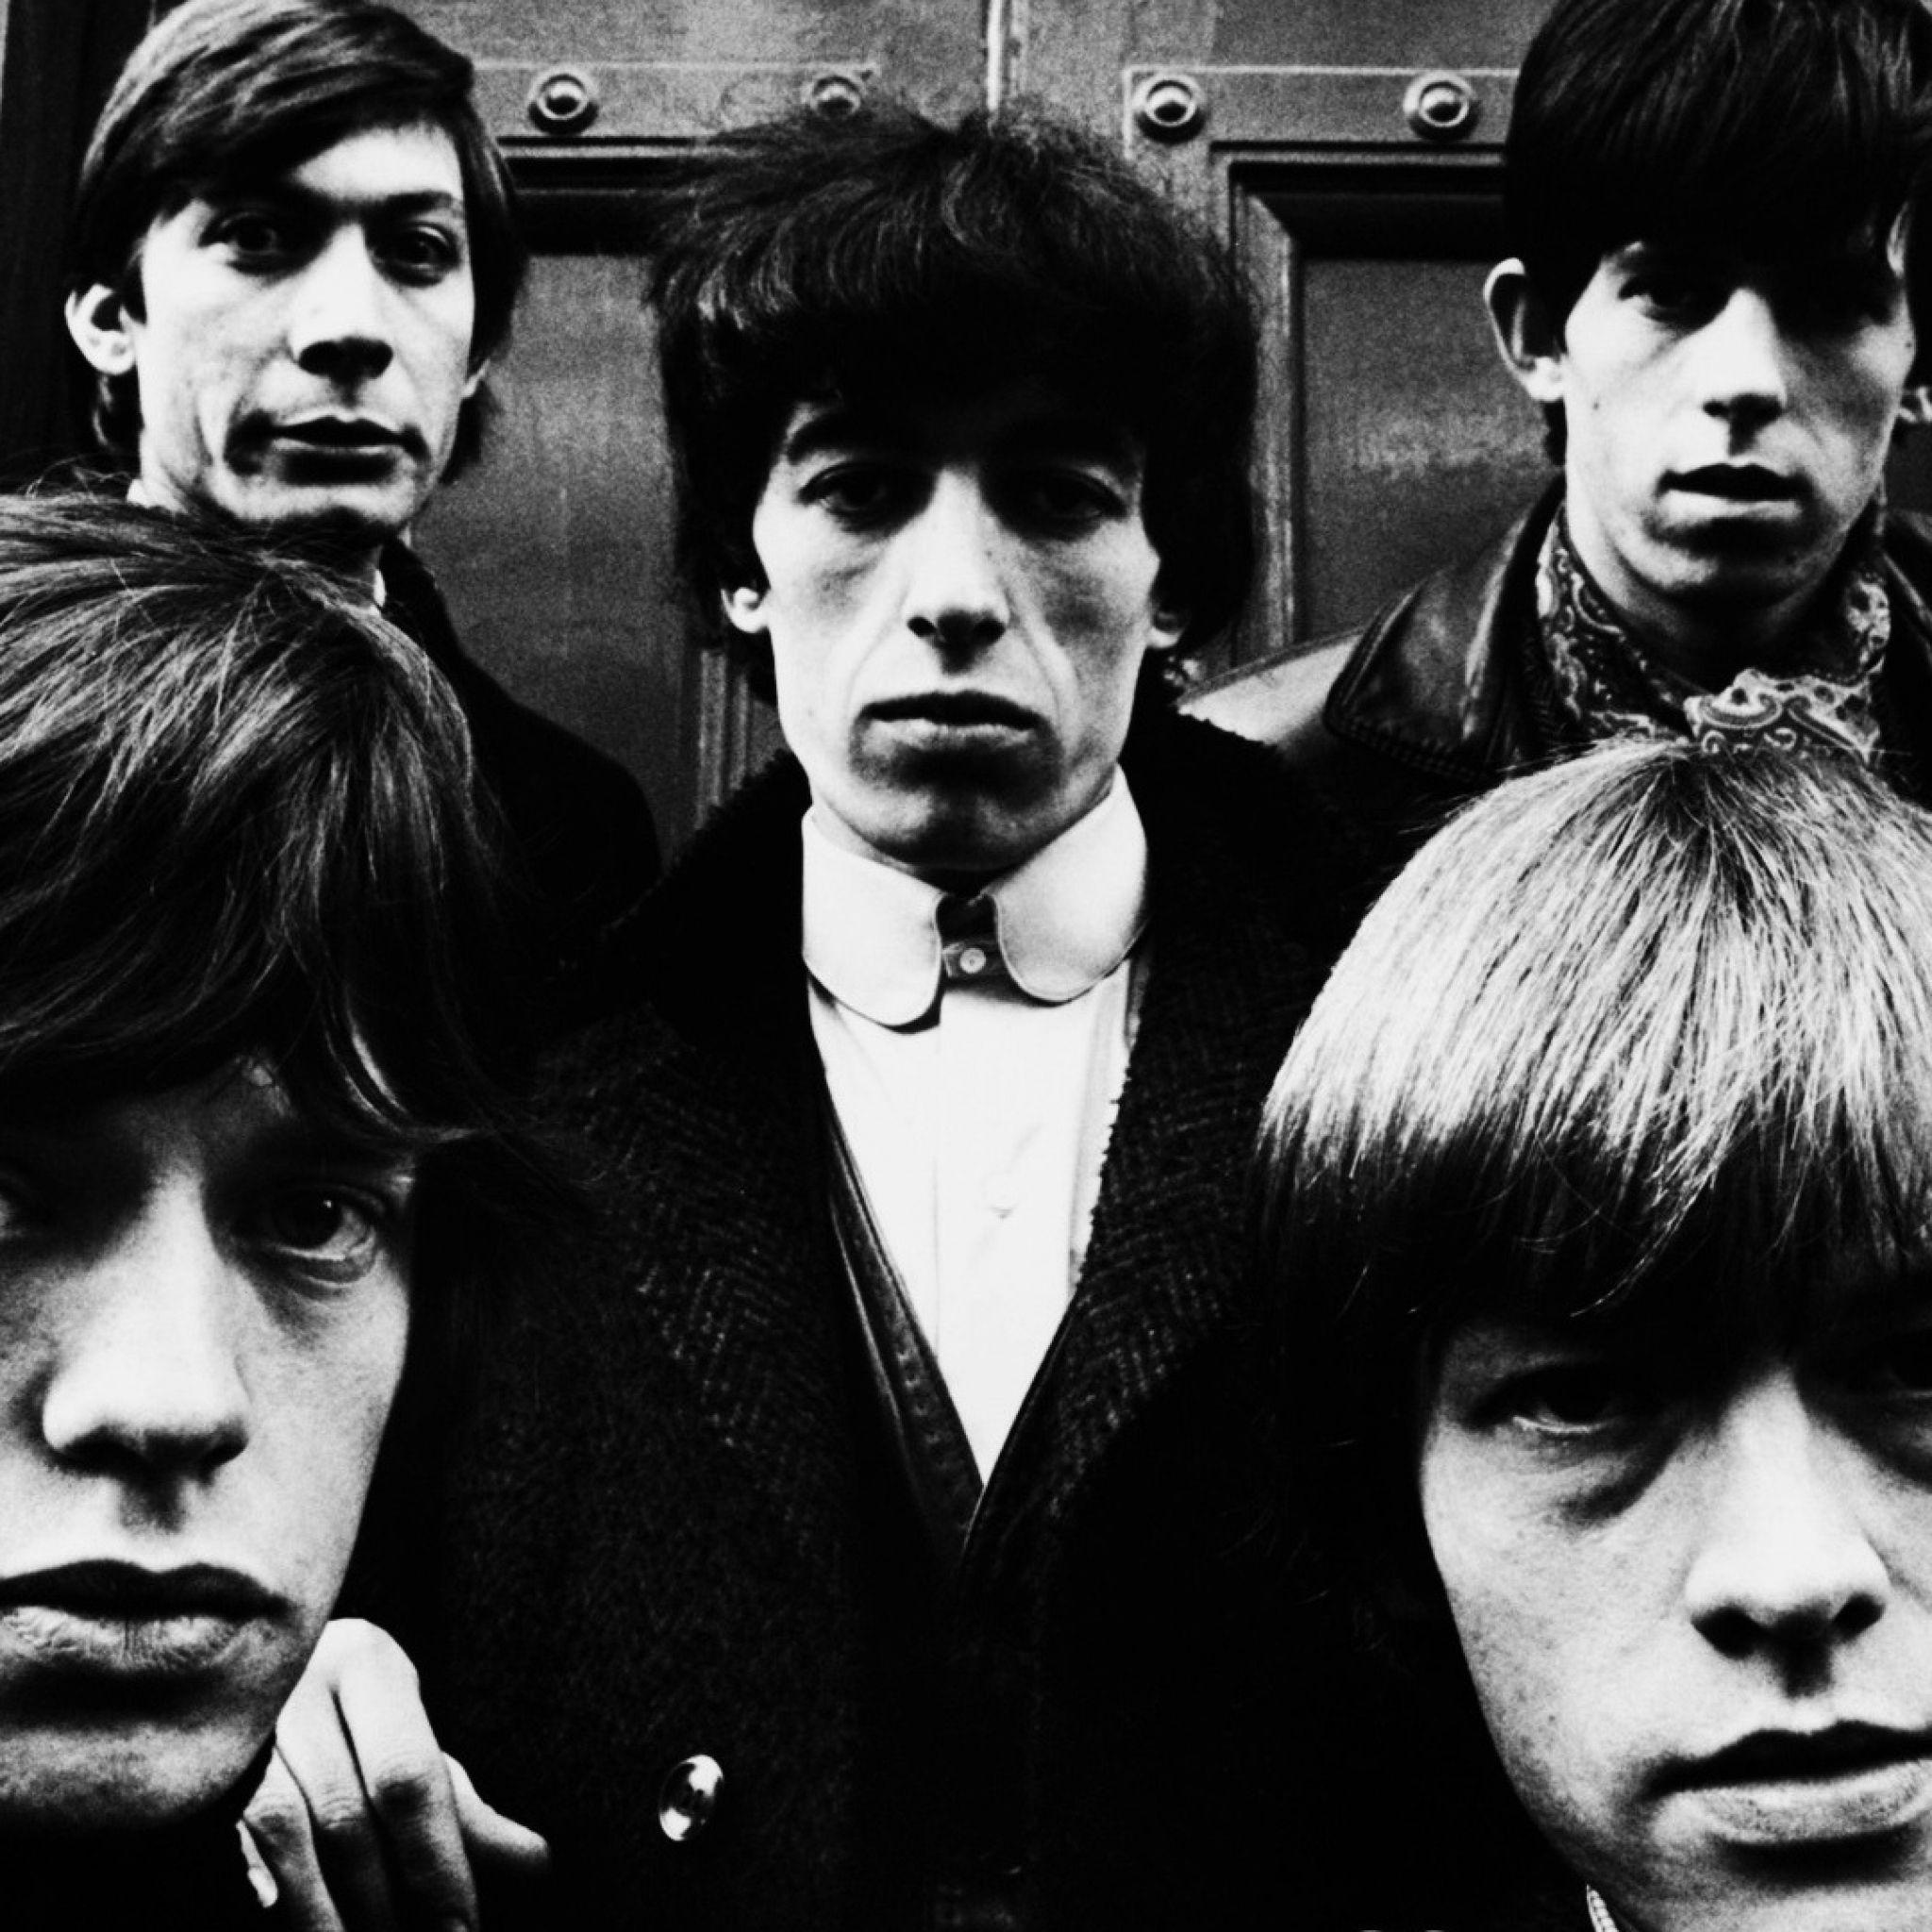 Download Wallpaper 2048x2048 The rolling stones, Band, Members